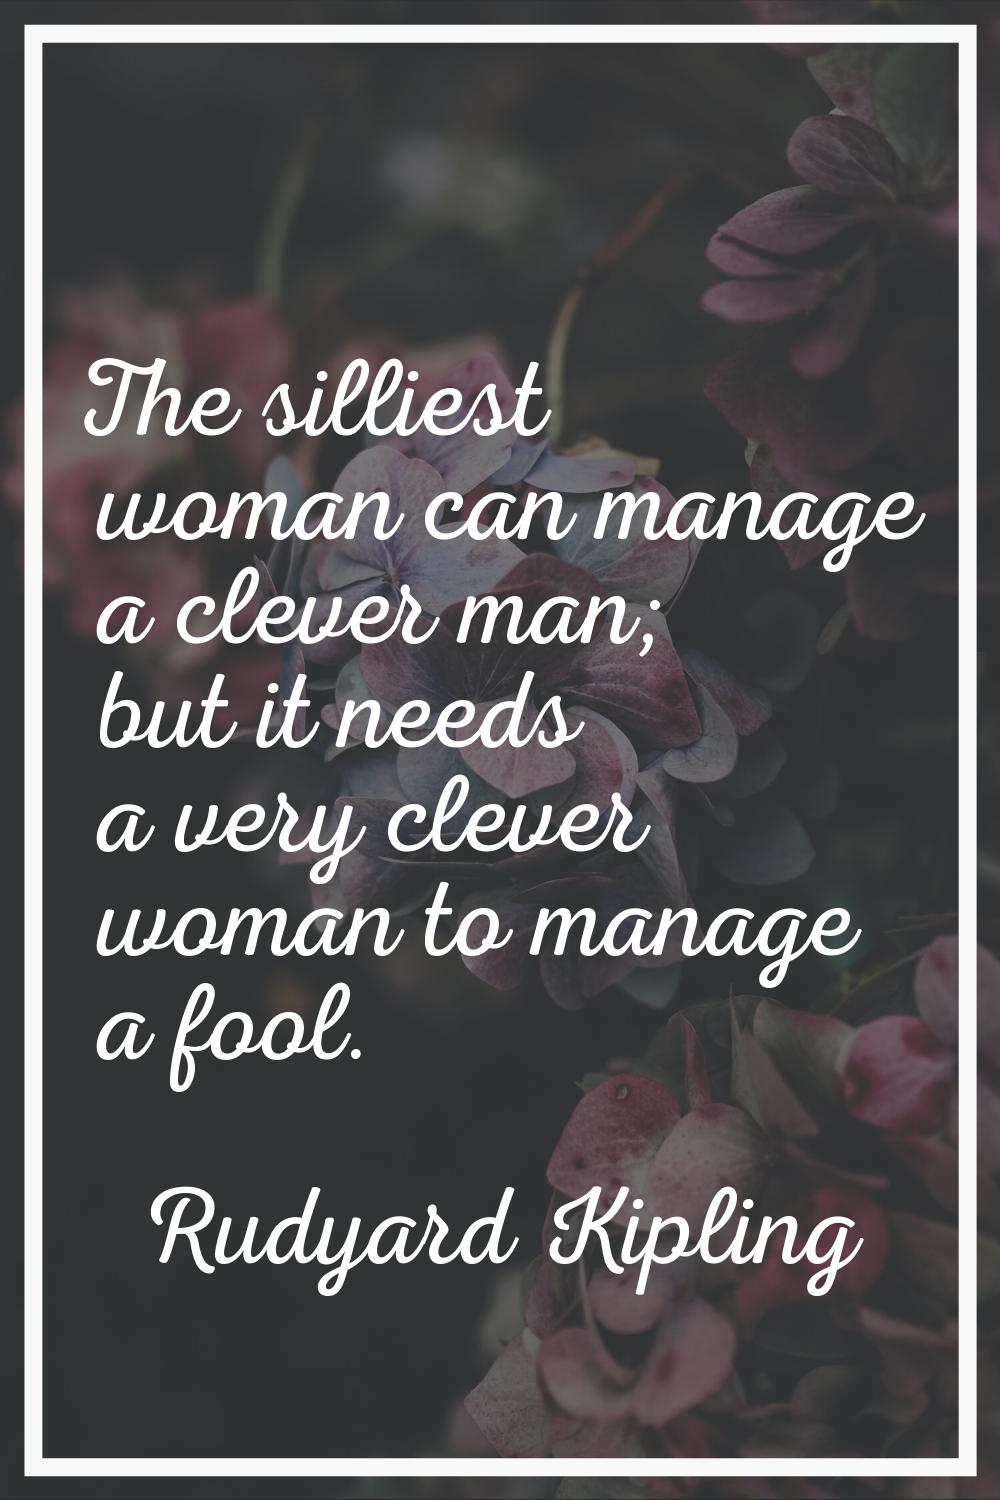 The silliest woman can manage a clever man; but it needs a very clever woman to manage a fool.